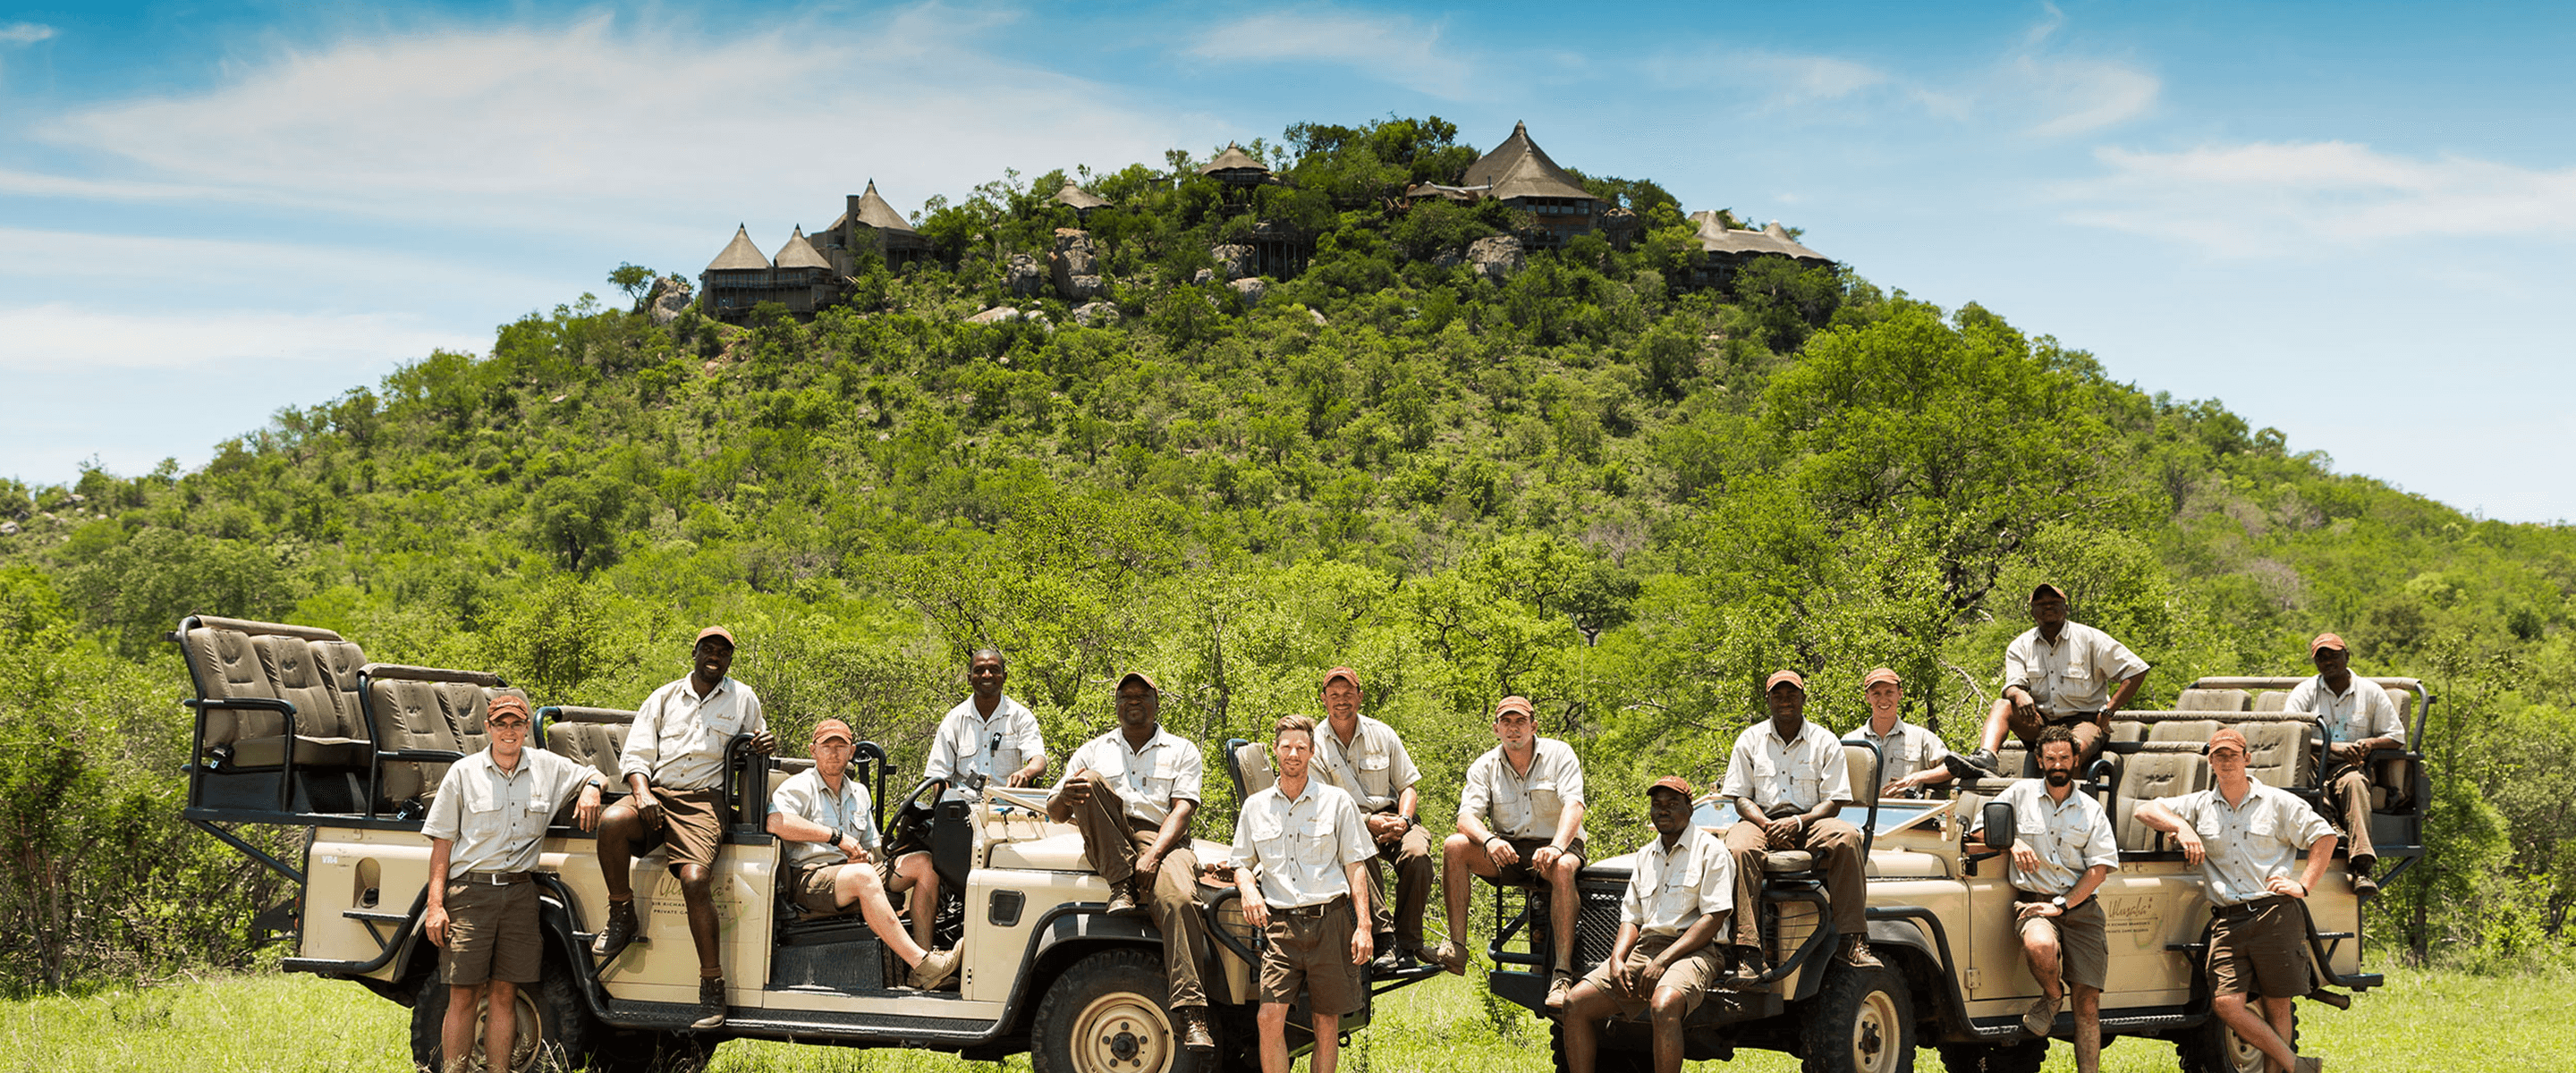 Rangers at Virgin Limited Edition's Ulusaba private safari game reserve